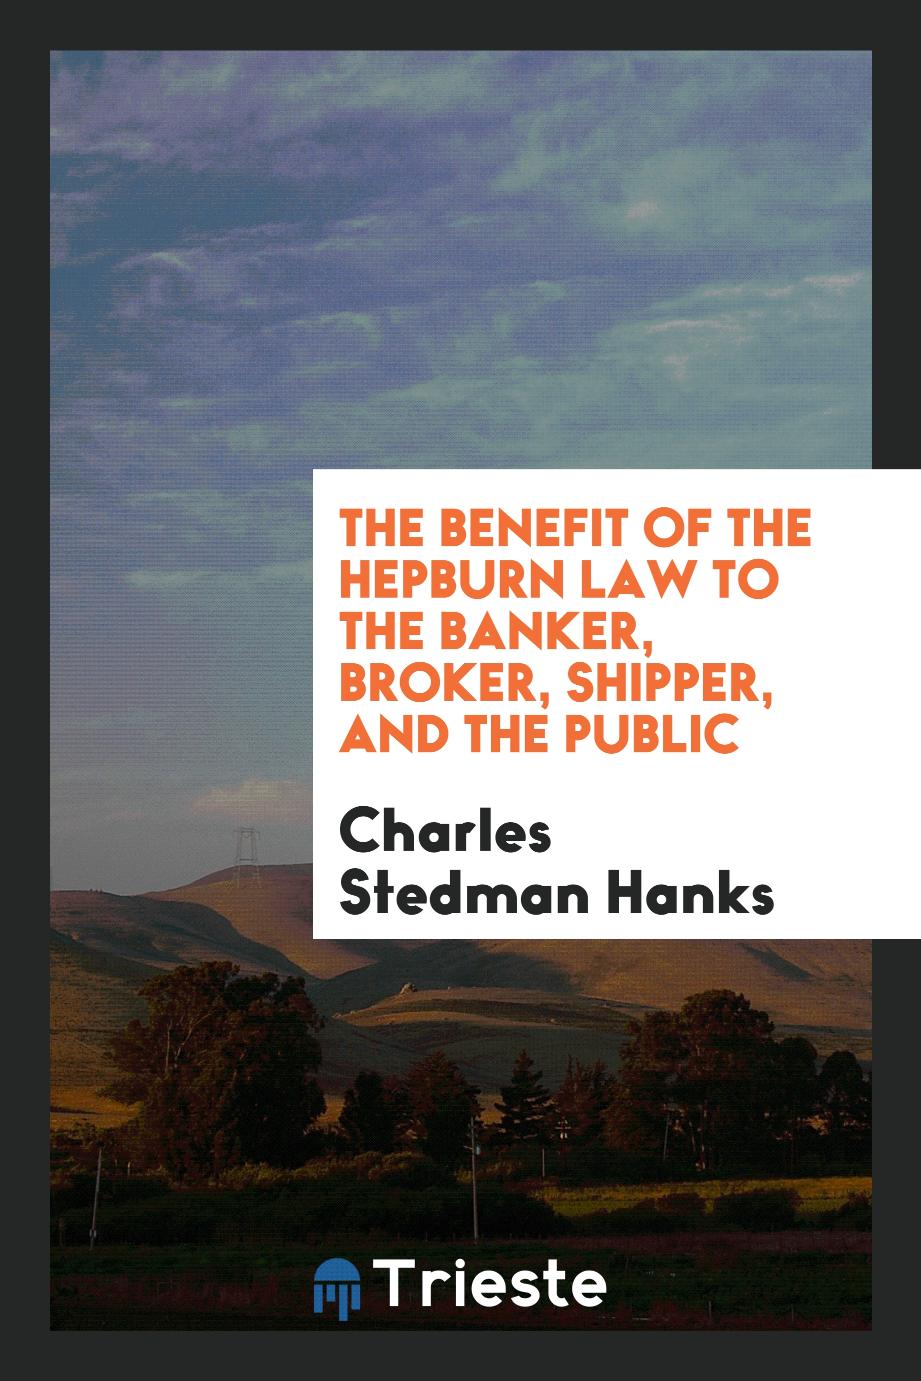 The benefit of the Hepburn law to the banker, broker, shipper, and the public